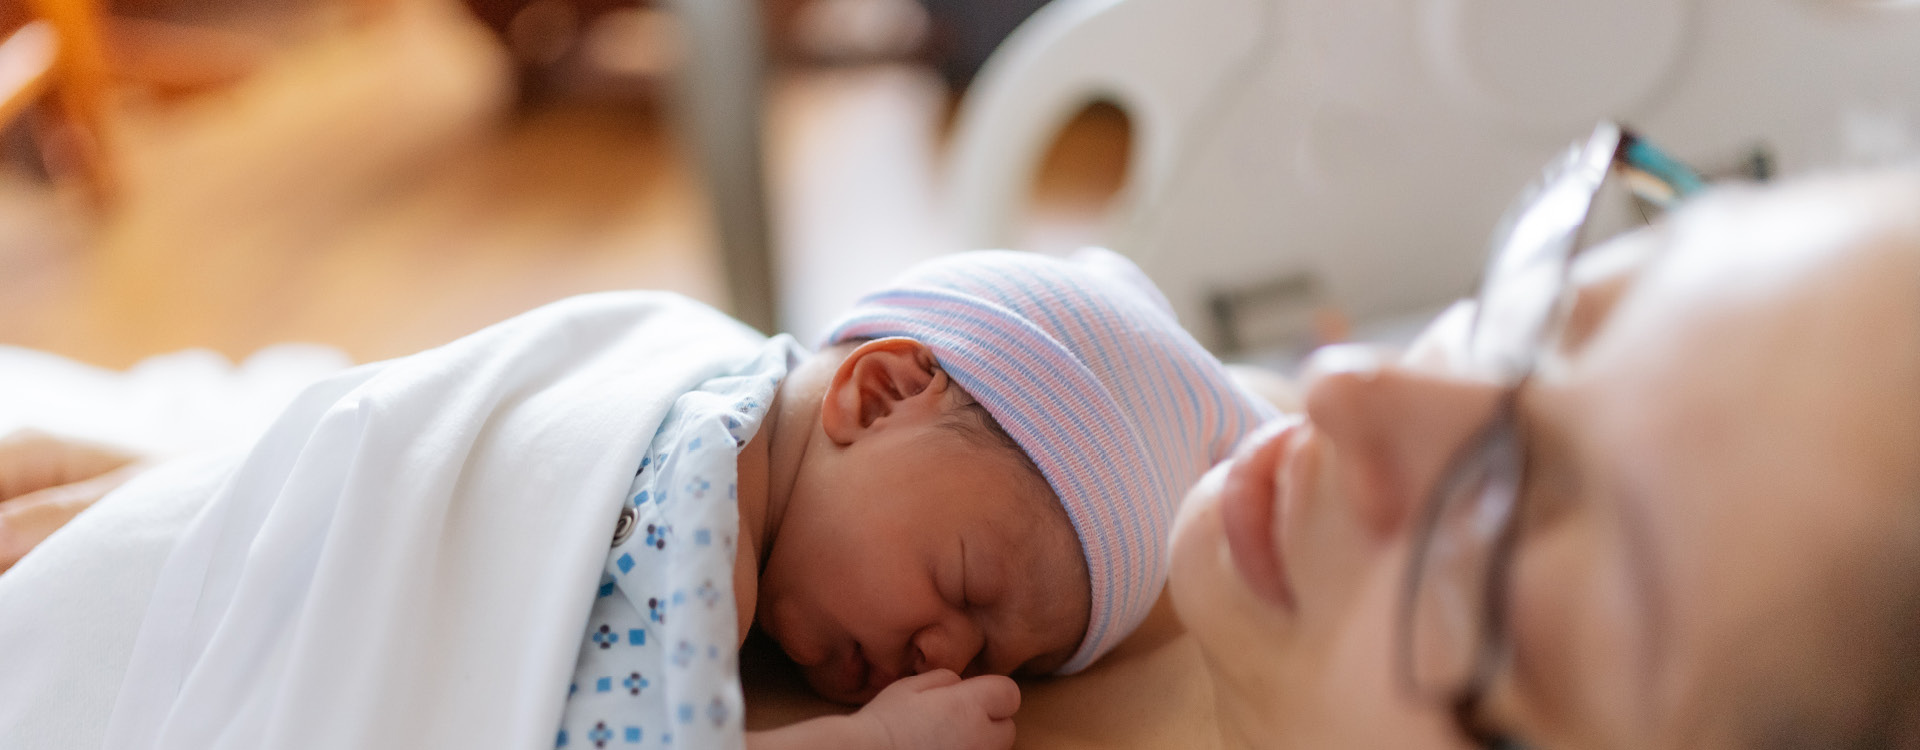 Lotus Birth: How It Works, Why It's Done, Is It Safe?